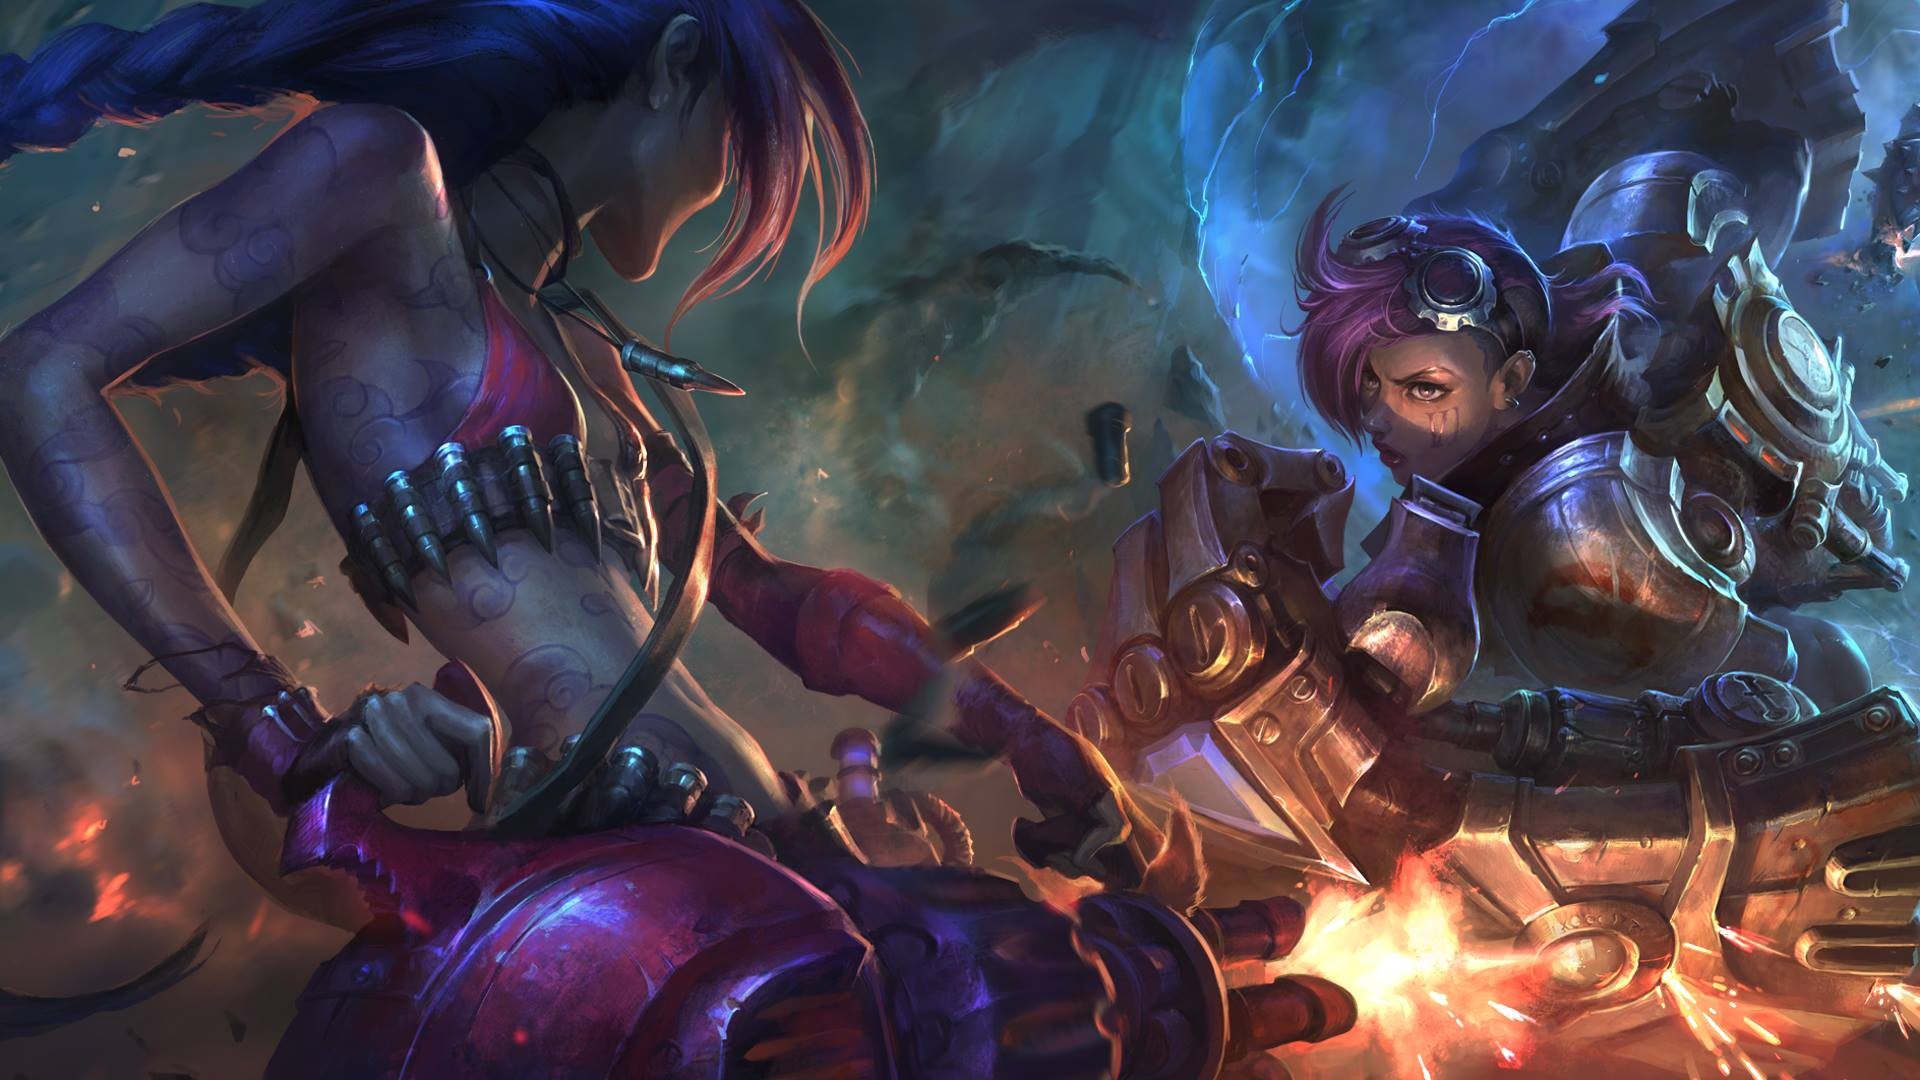 General 1920x1080 Vi (League of Legends) Jinx (League of Legends) League of Legends video games fantasy art ammunition women video game art video game girls video game characters skinny